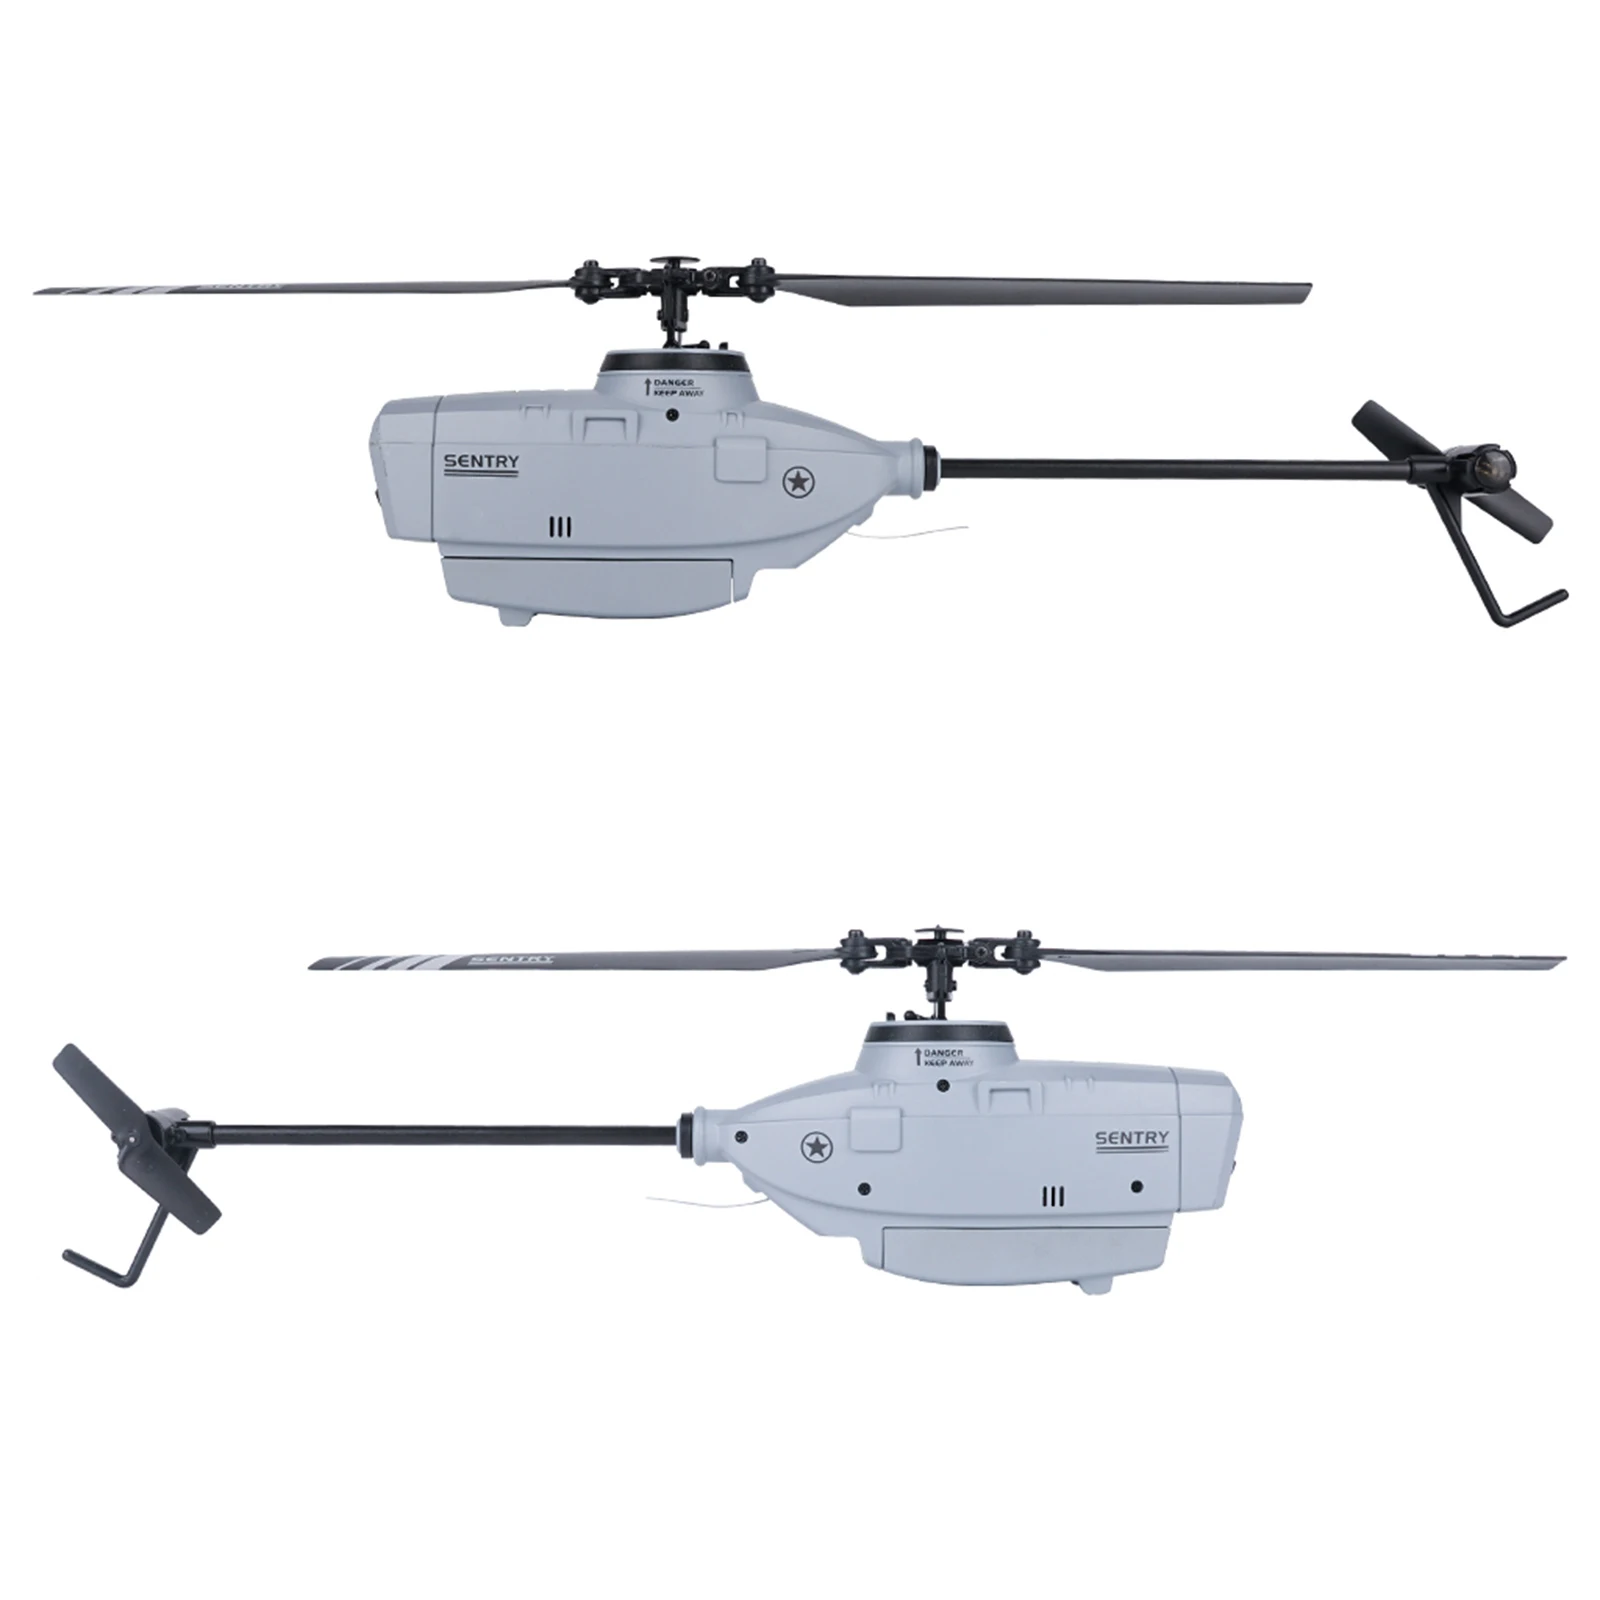 

RC ERA C127 2.4G 4CH 6-Axis Gyro Altitude Hold Optical Flow Localization Flybarless RTF Sentry Helicopter with 720P Camera Drone